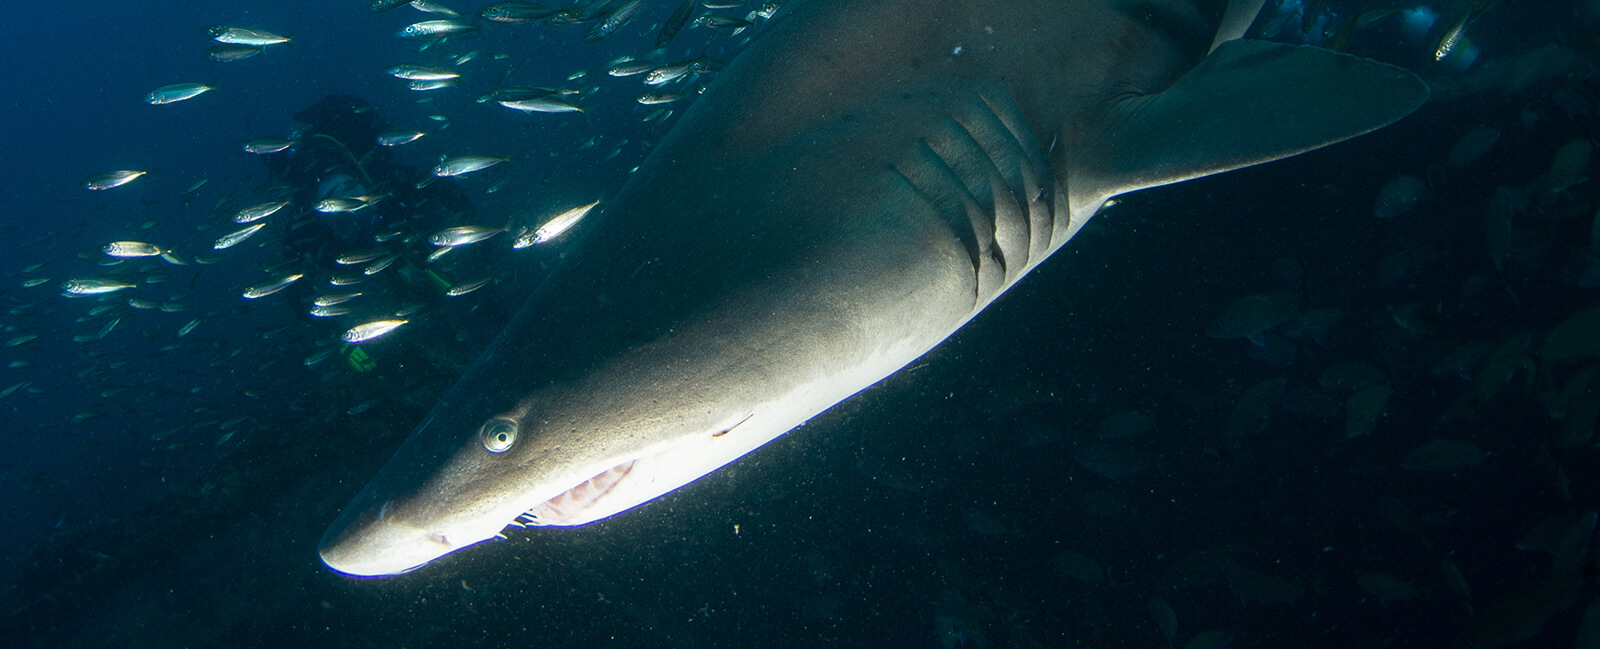 A shark with many small fish swimming around